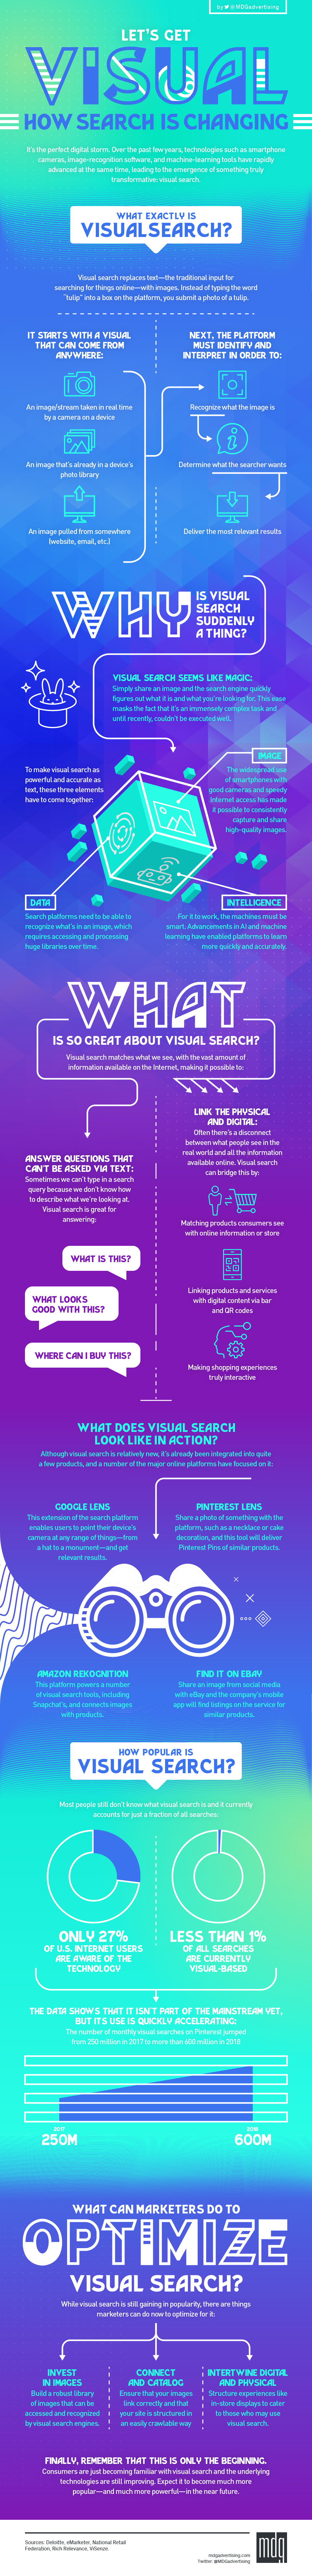 Let’s Get Visual: How Search Is Changing